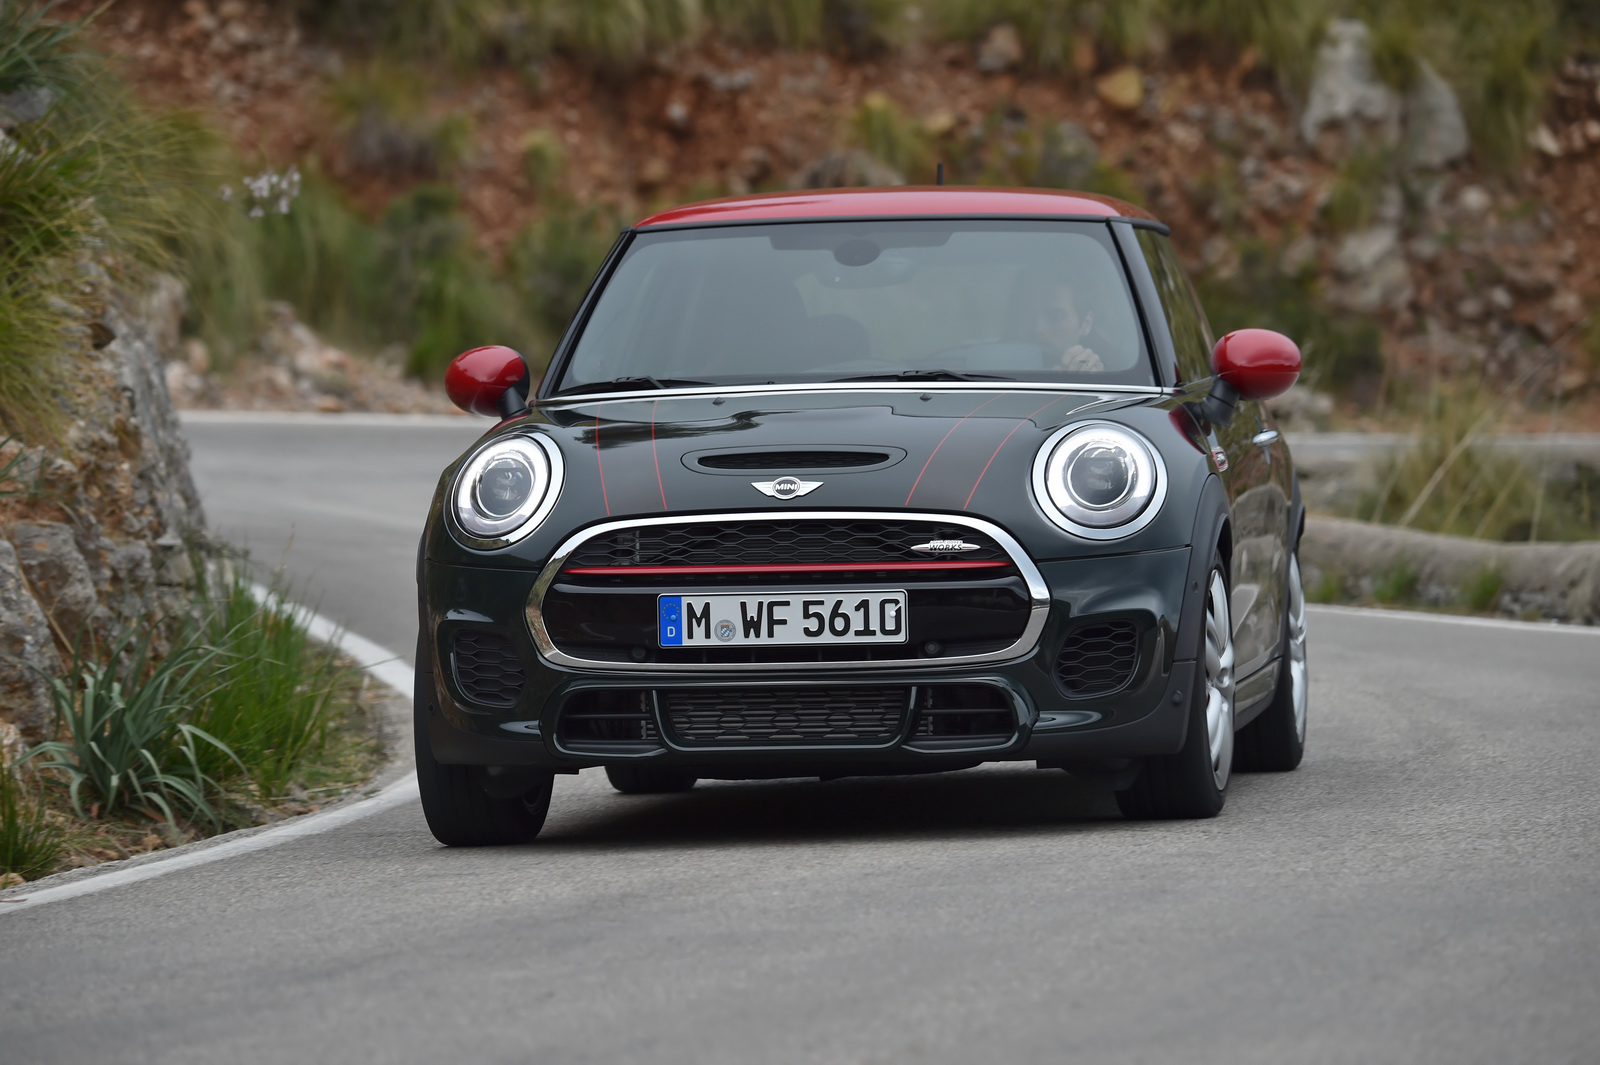 2015 Mini JCW Hatch Priced From £23,050 In The UK, €31,750 in Germany ...